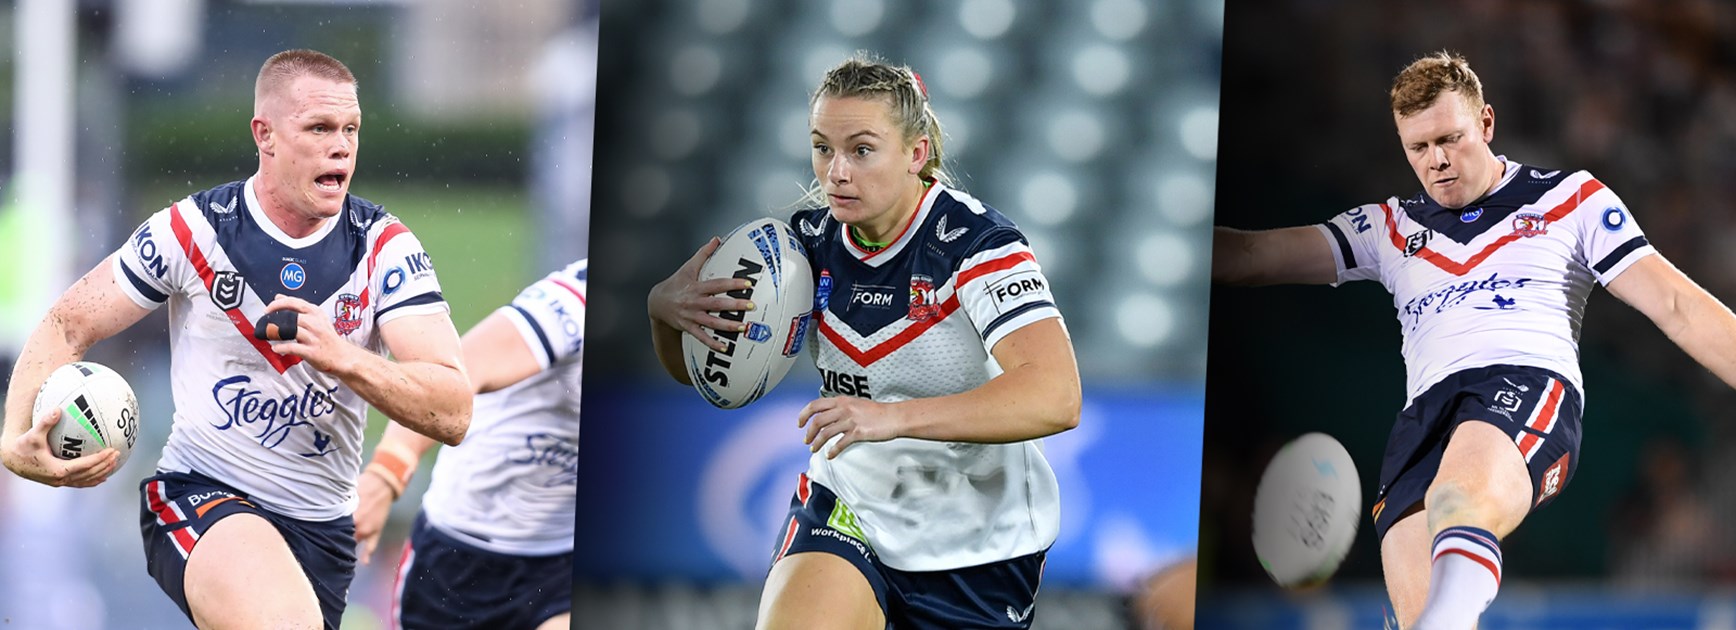 Roosters Trio Named in 2021 Academic Team of the Year